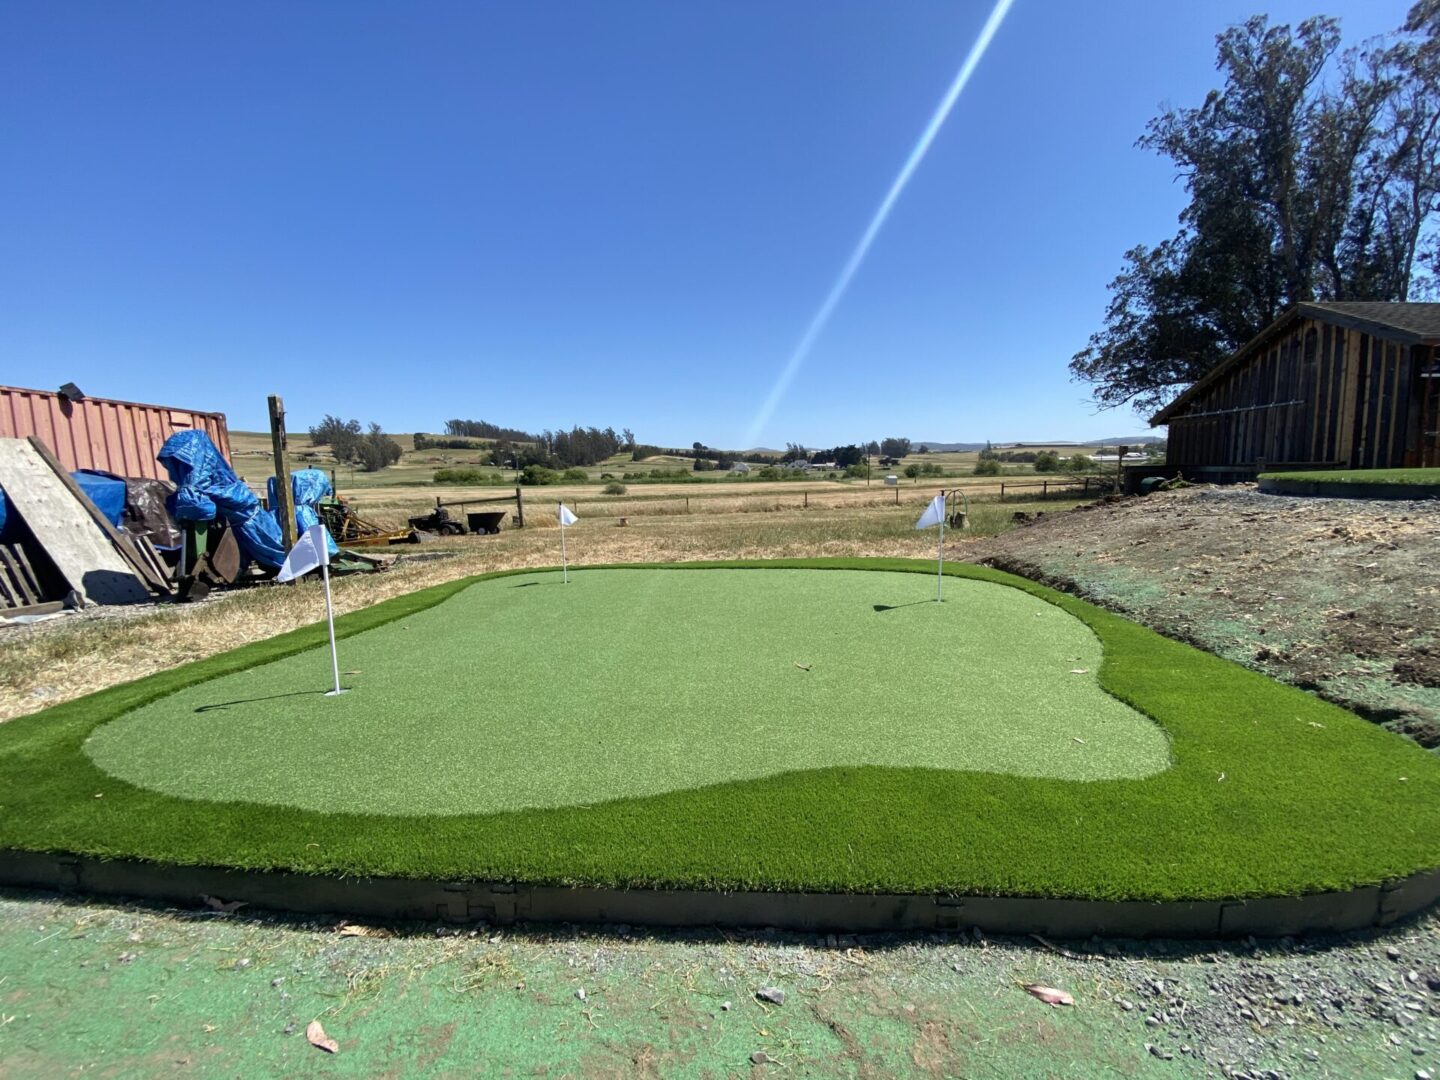 Putting artificial grass for recreational course, landscaping by Guys Yard Design in Sonoma, CA